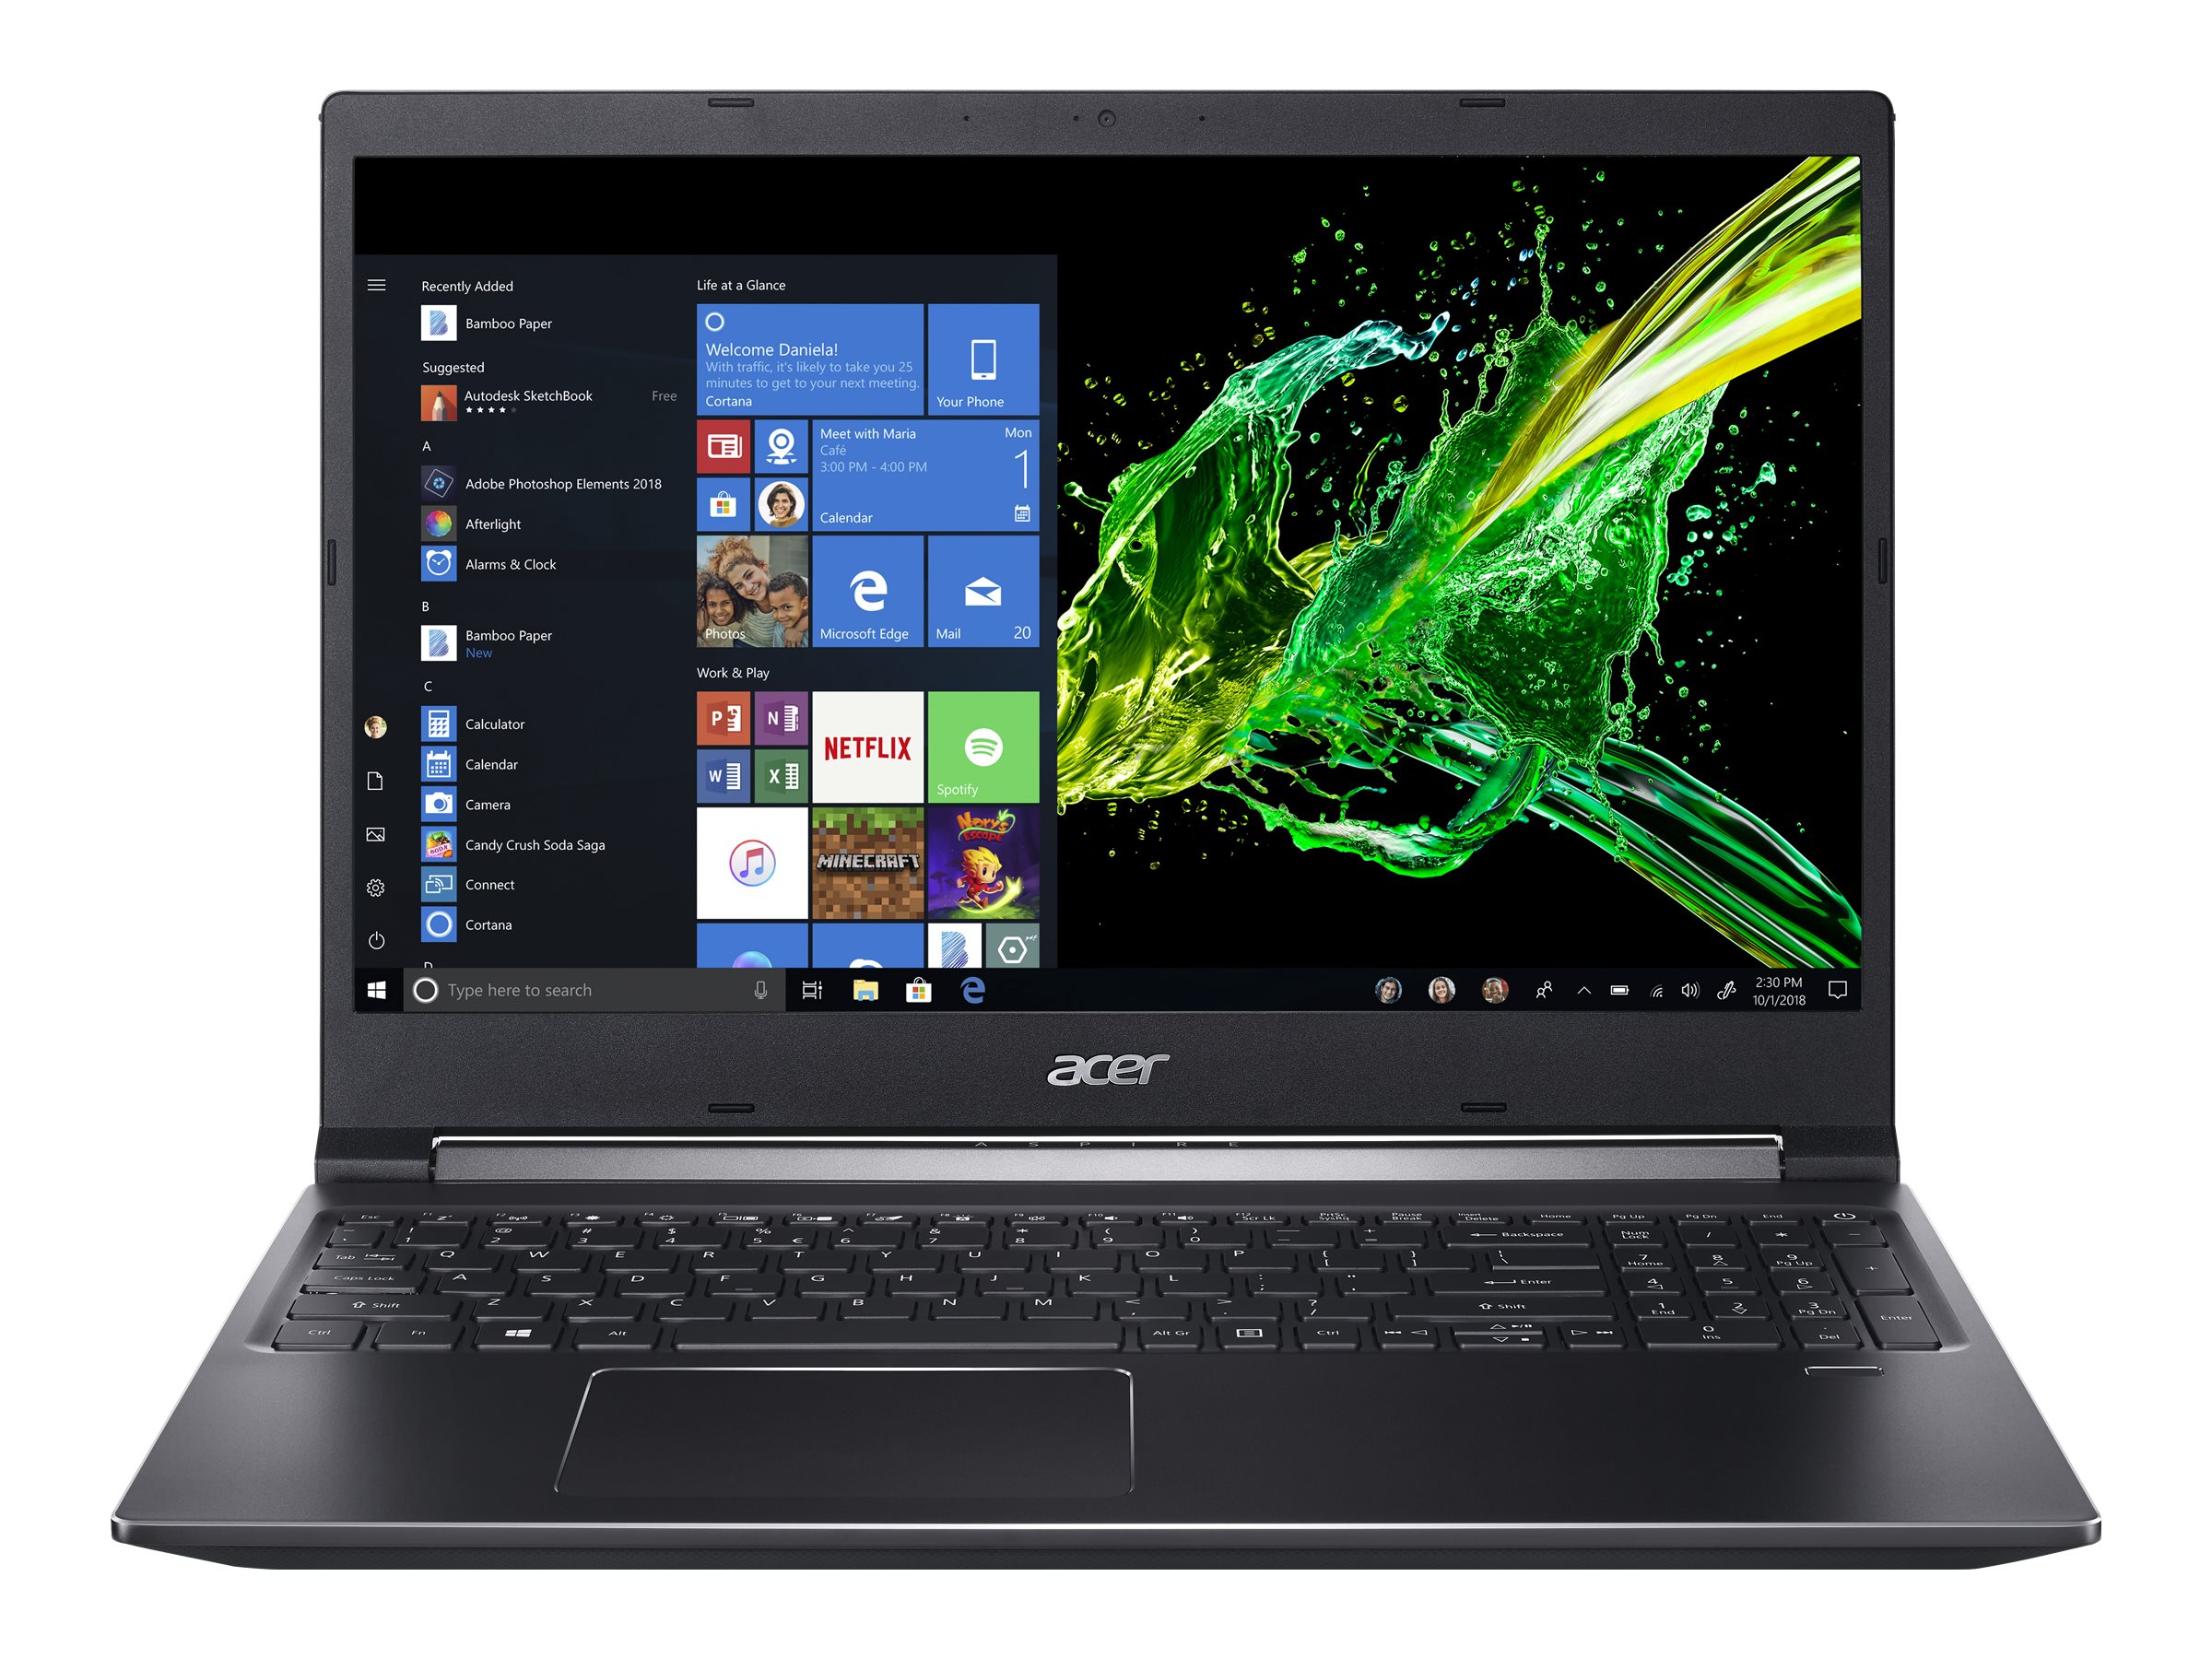 Acer Aspire 7 15.6" Full HD Laptop, Intel Core i7 i7-9750H, 512GB SSD, Windows 10 Home, A715-74G-71WS - image 2 of 8